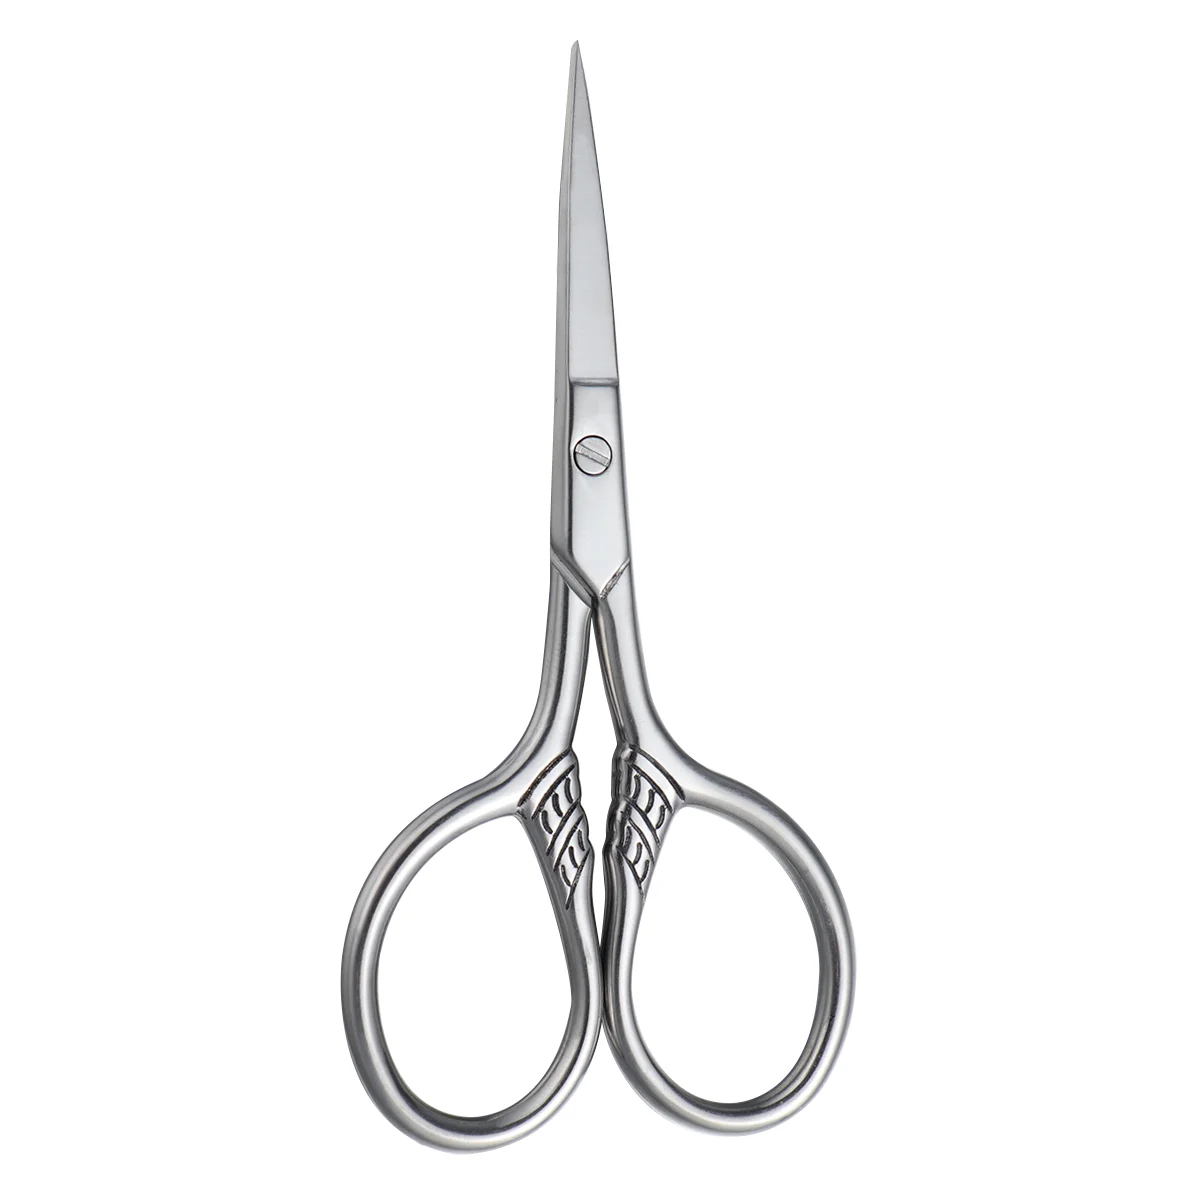 Stainless Steel Nose Hair& Beard Trimming Mustache Trimming Shear Professional Hair Scissor Small Grooming for Men Silver bypass pruners professional pruning scissors for plant trimming garden flower pruner floral shears for cutting flower bonsai and